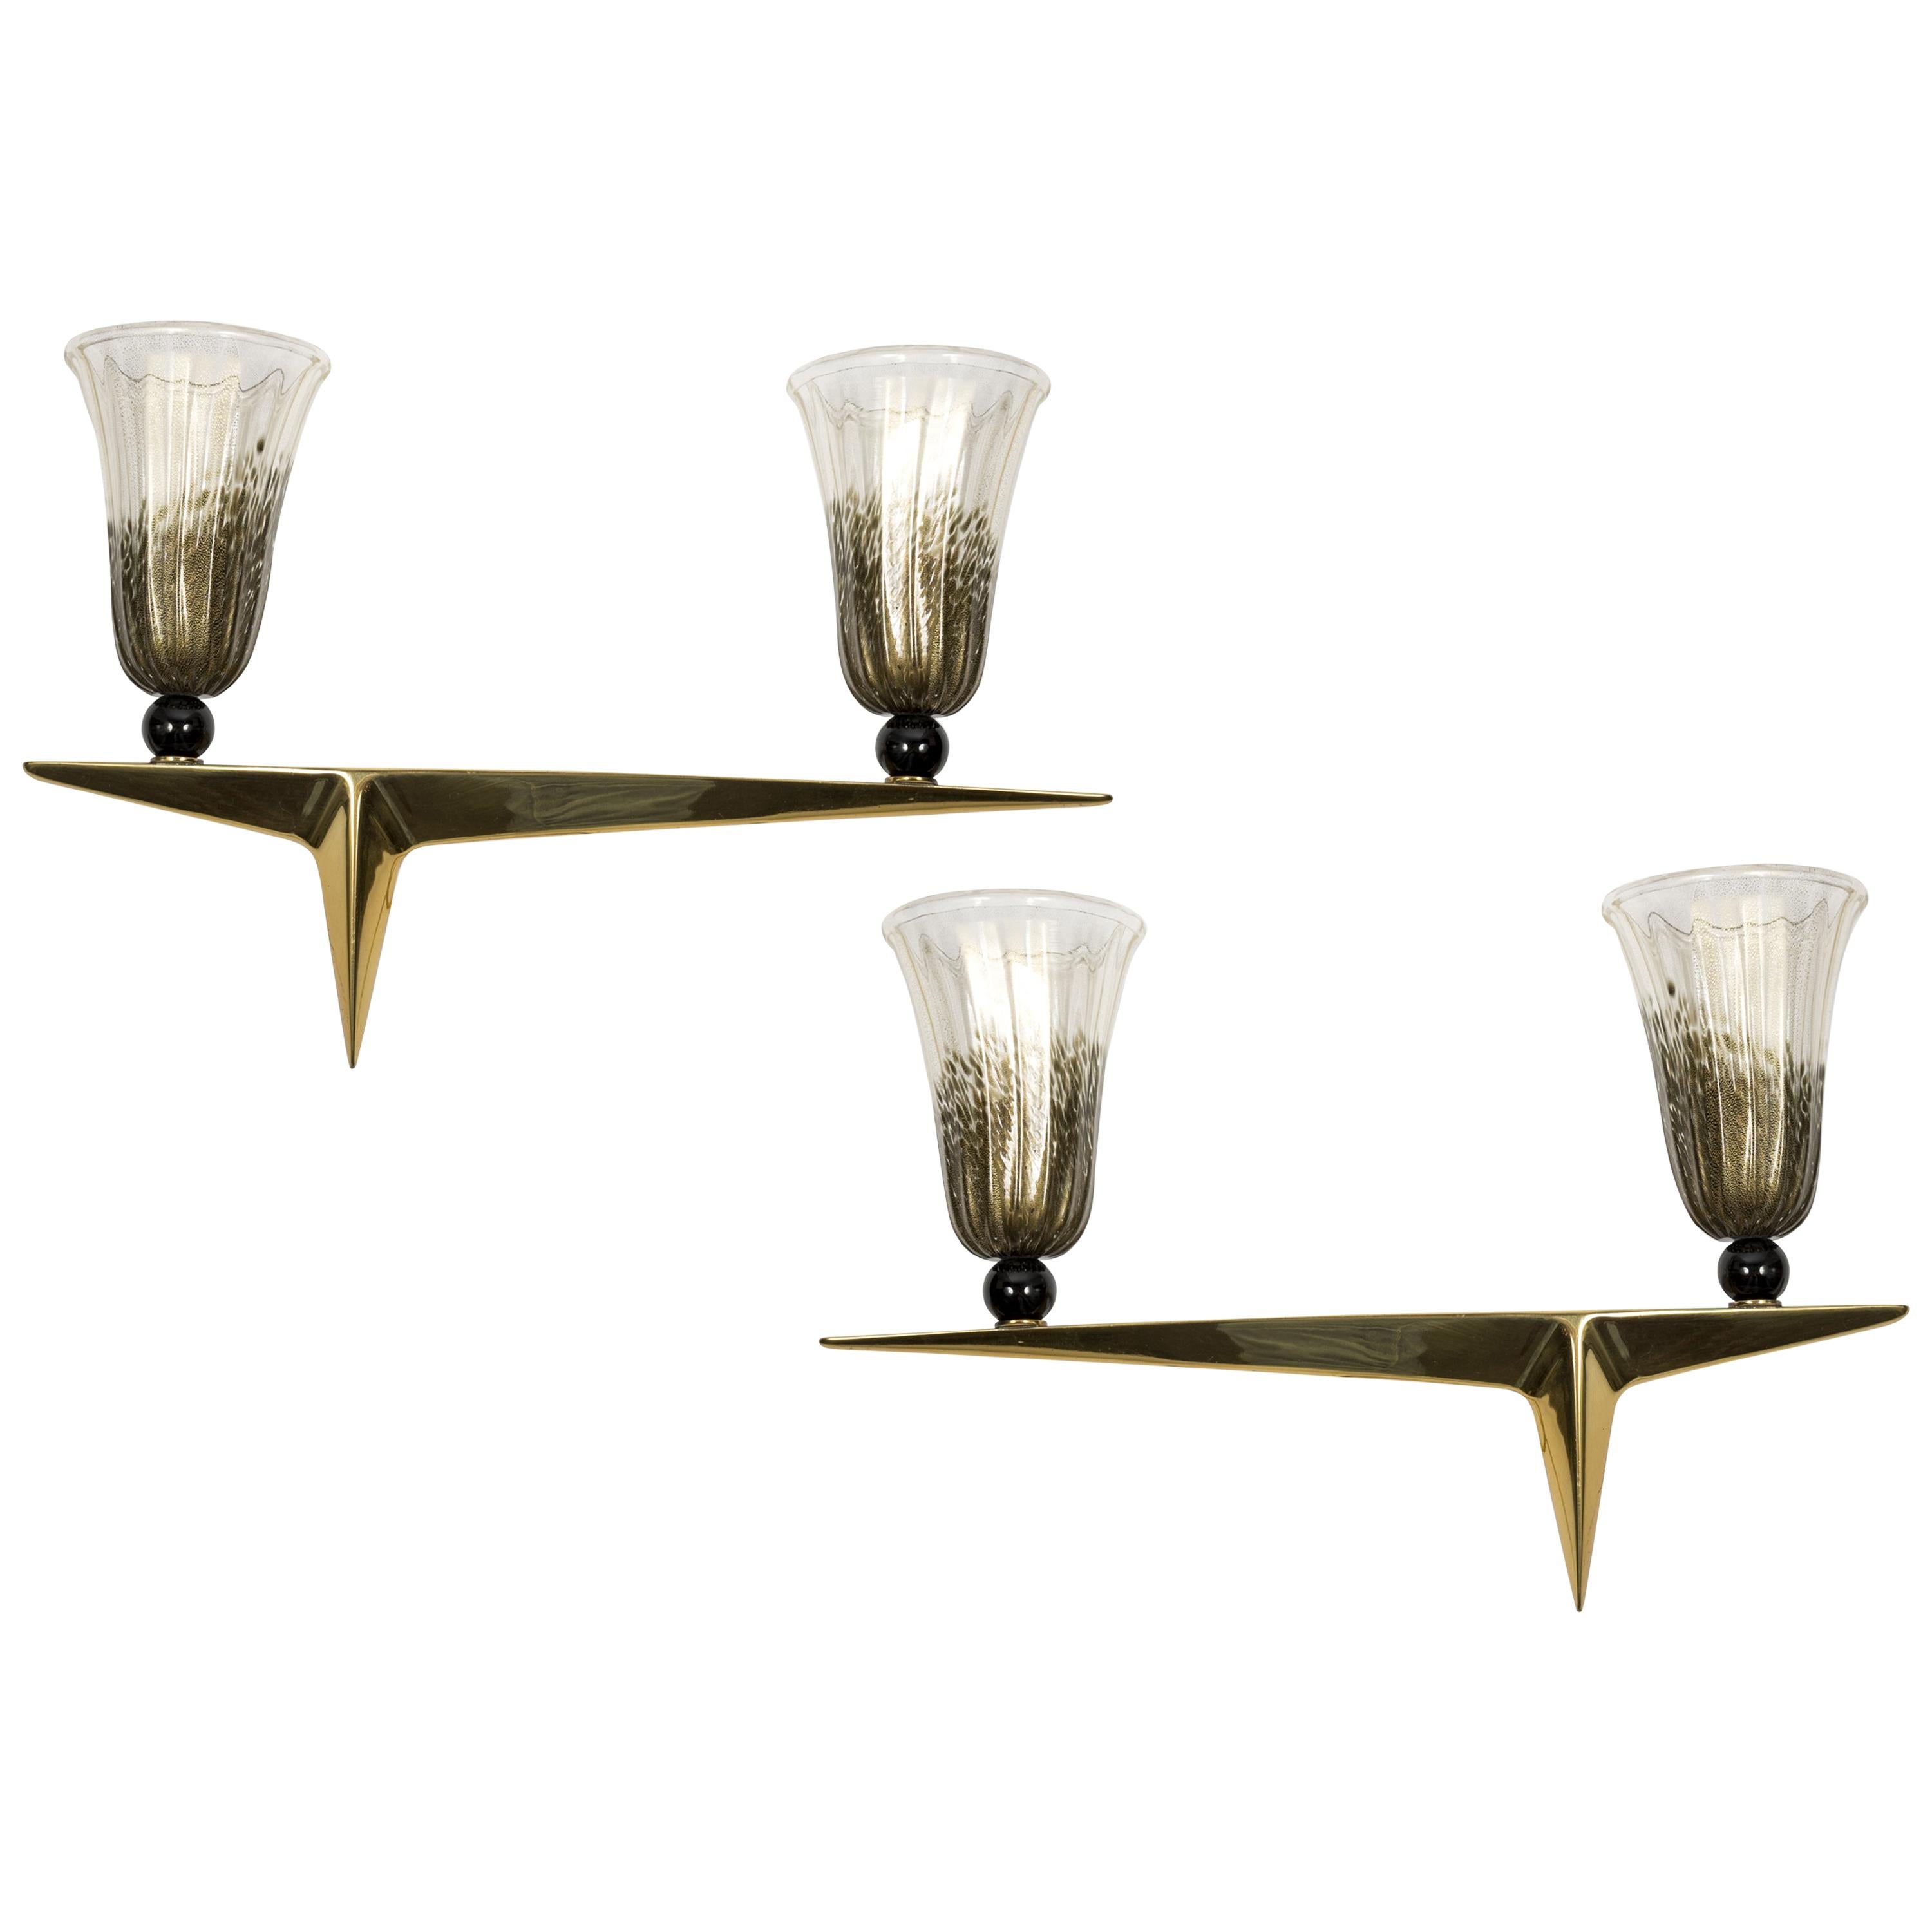 Pair of 1950s Murano Glass Sconces